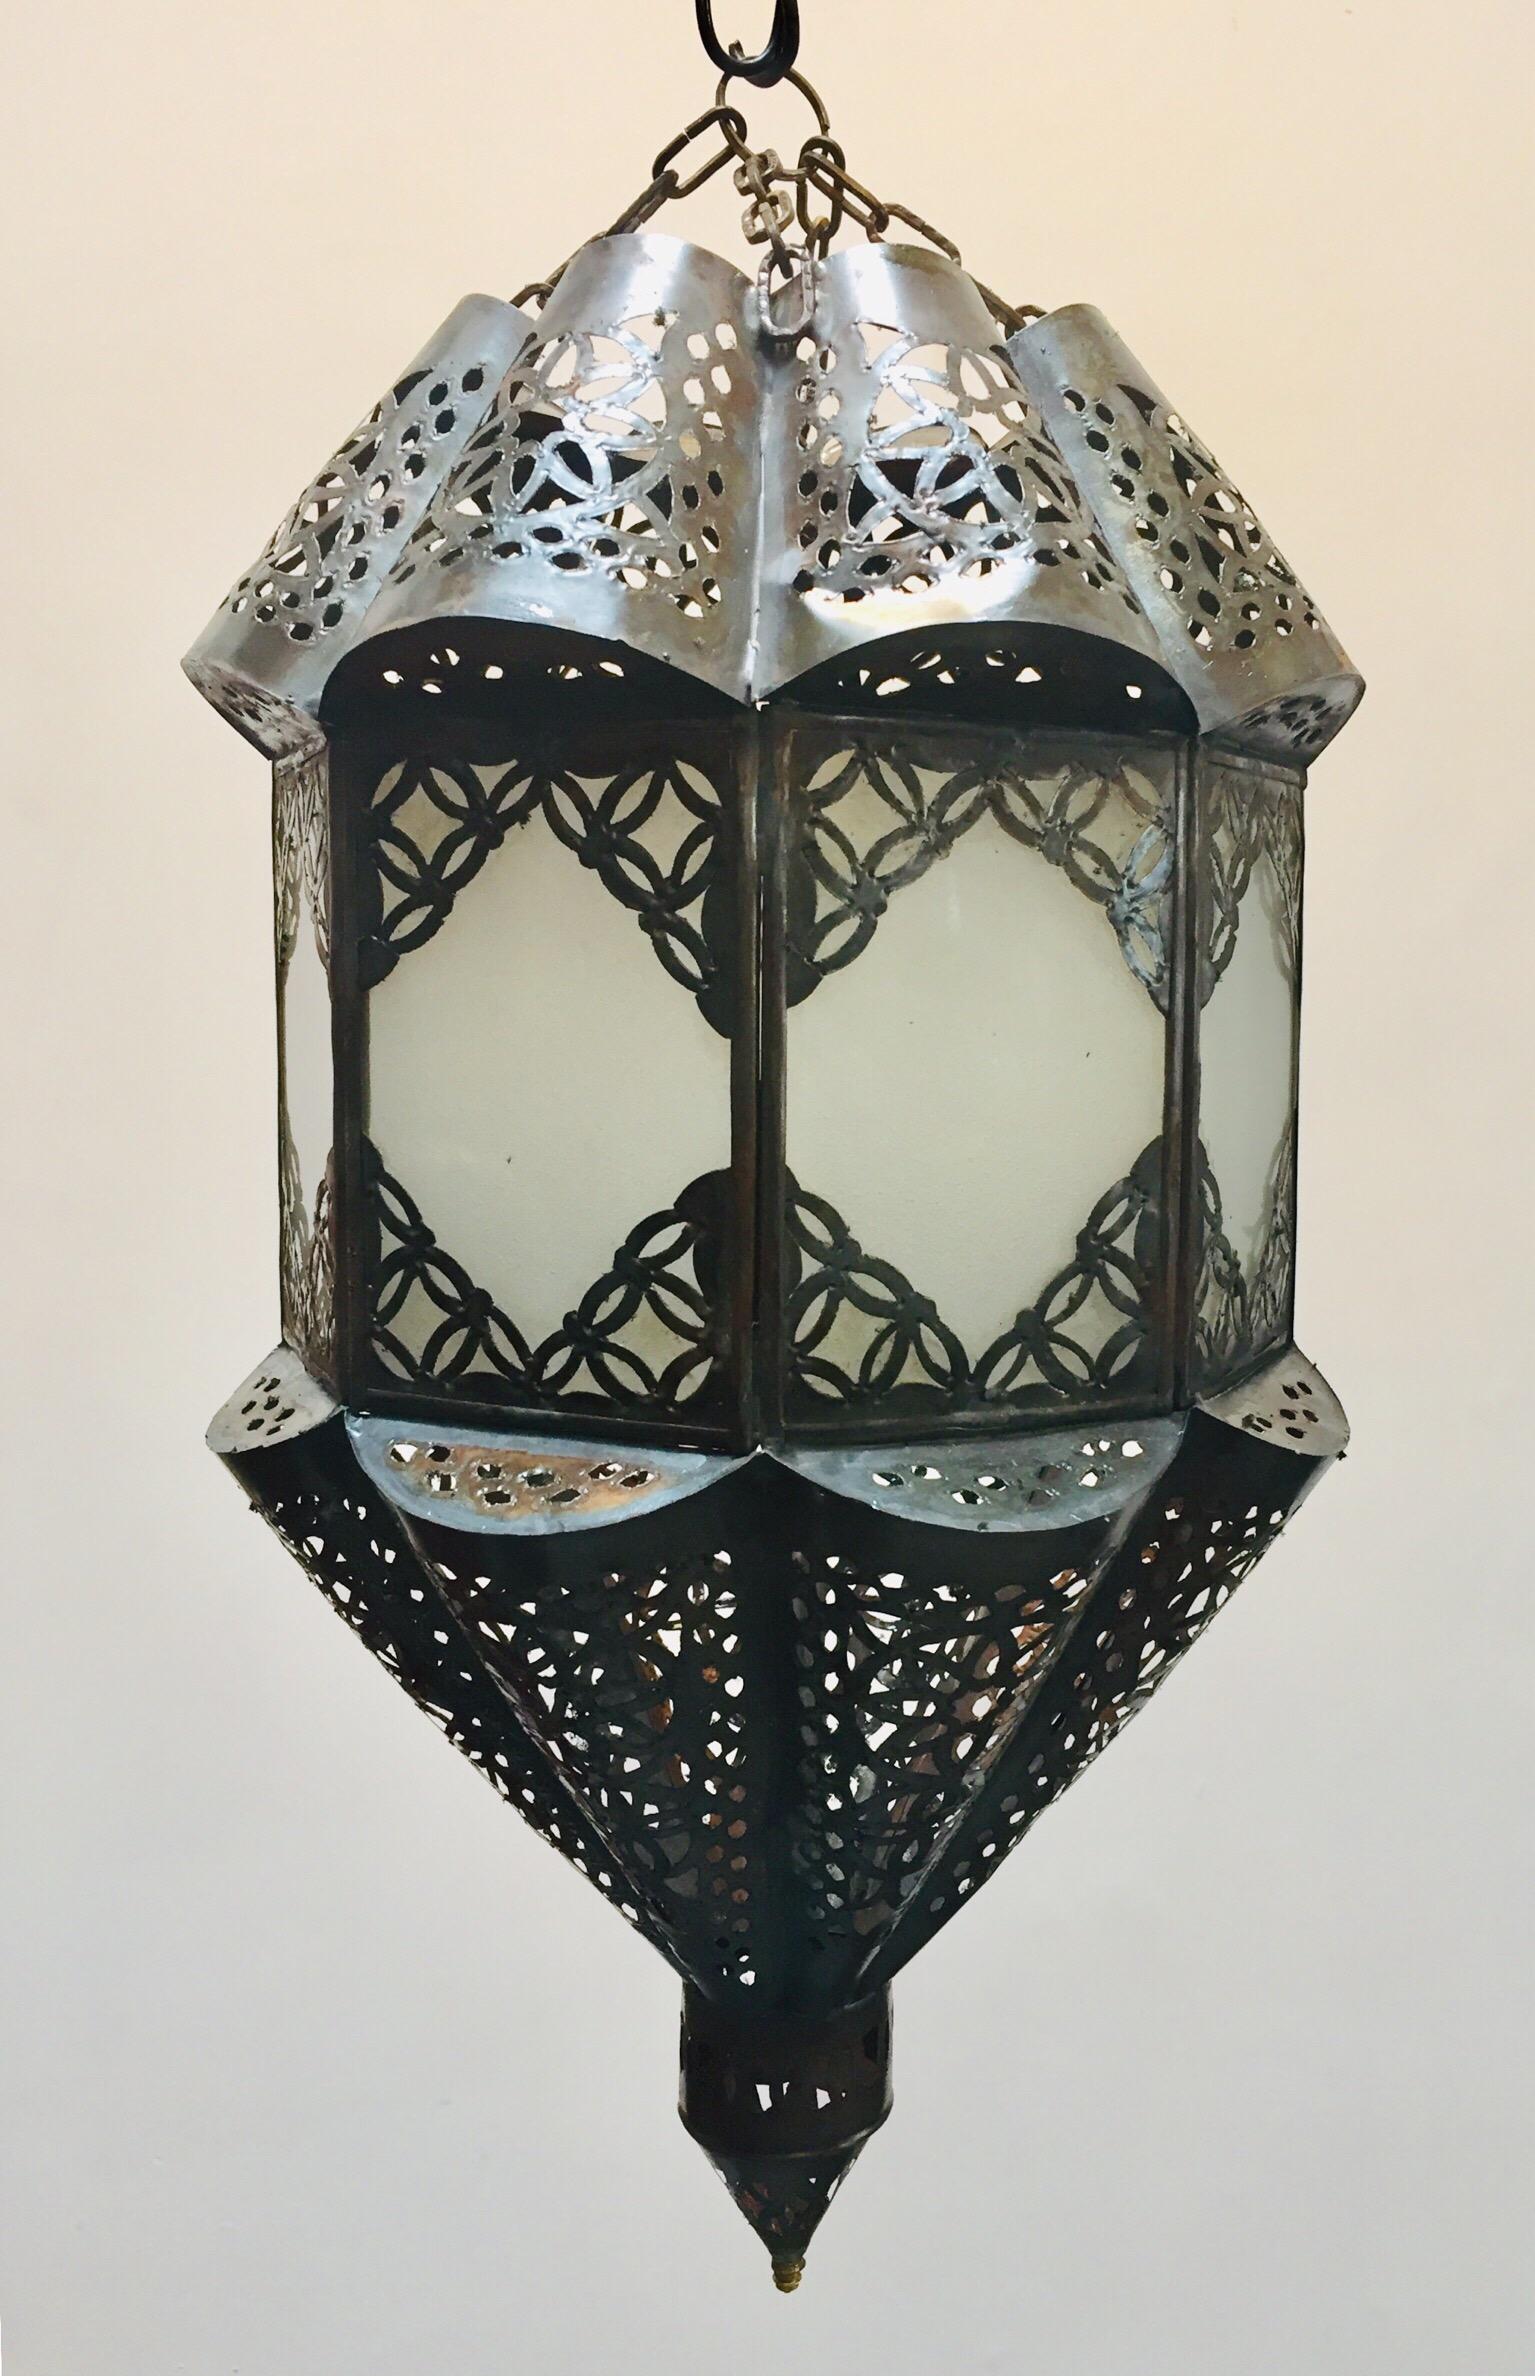 Stylish handcrafted Moroccan lantern pendant with frosted milky glass.
Handmade with small cut-glass with Moorish filigree metal designs.
Multiple available. Not wired for electricity, shade only.
Dimensions: 9